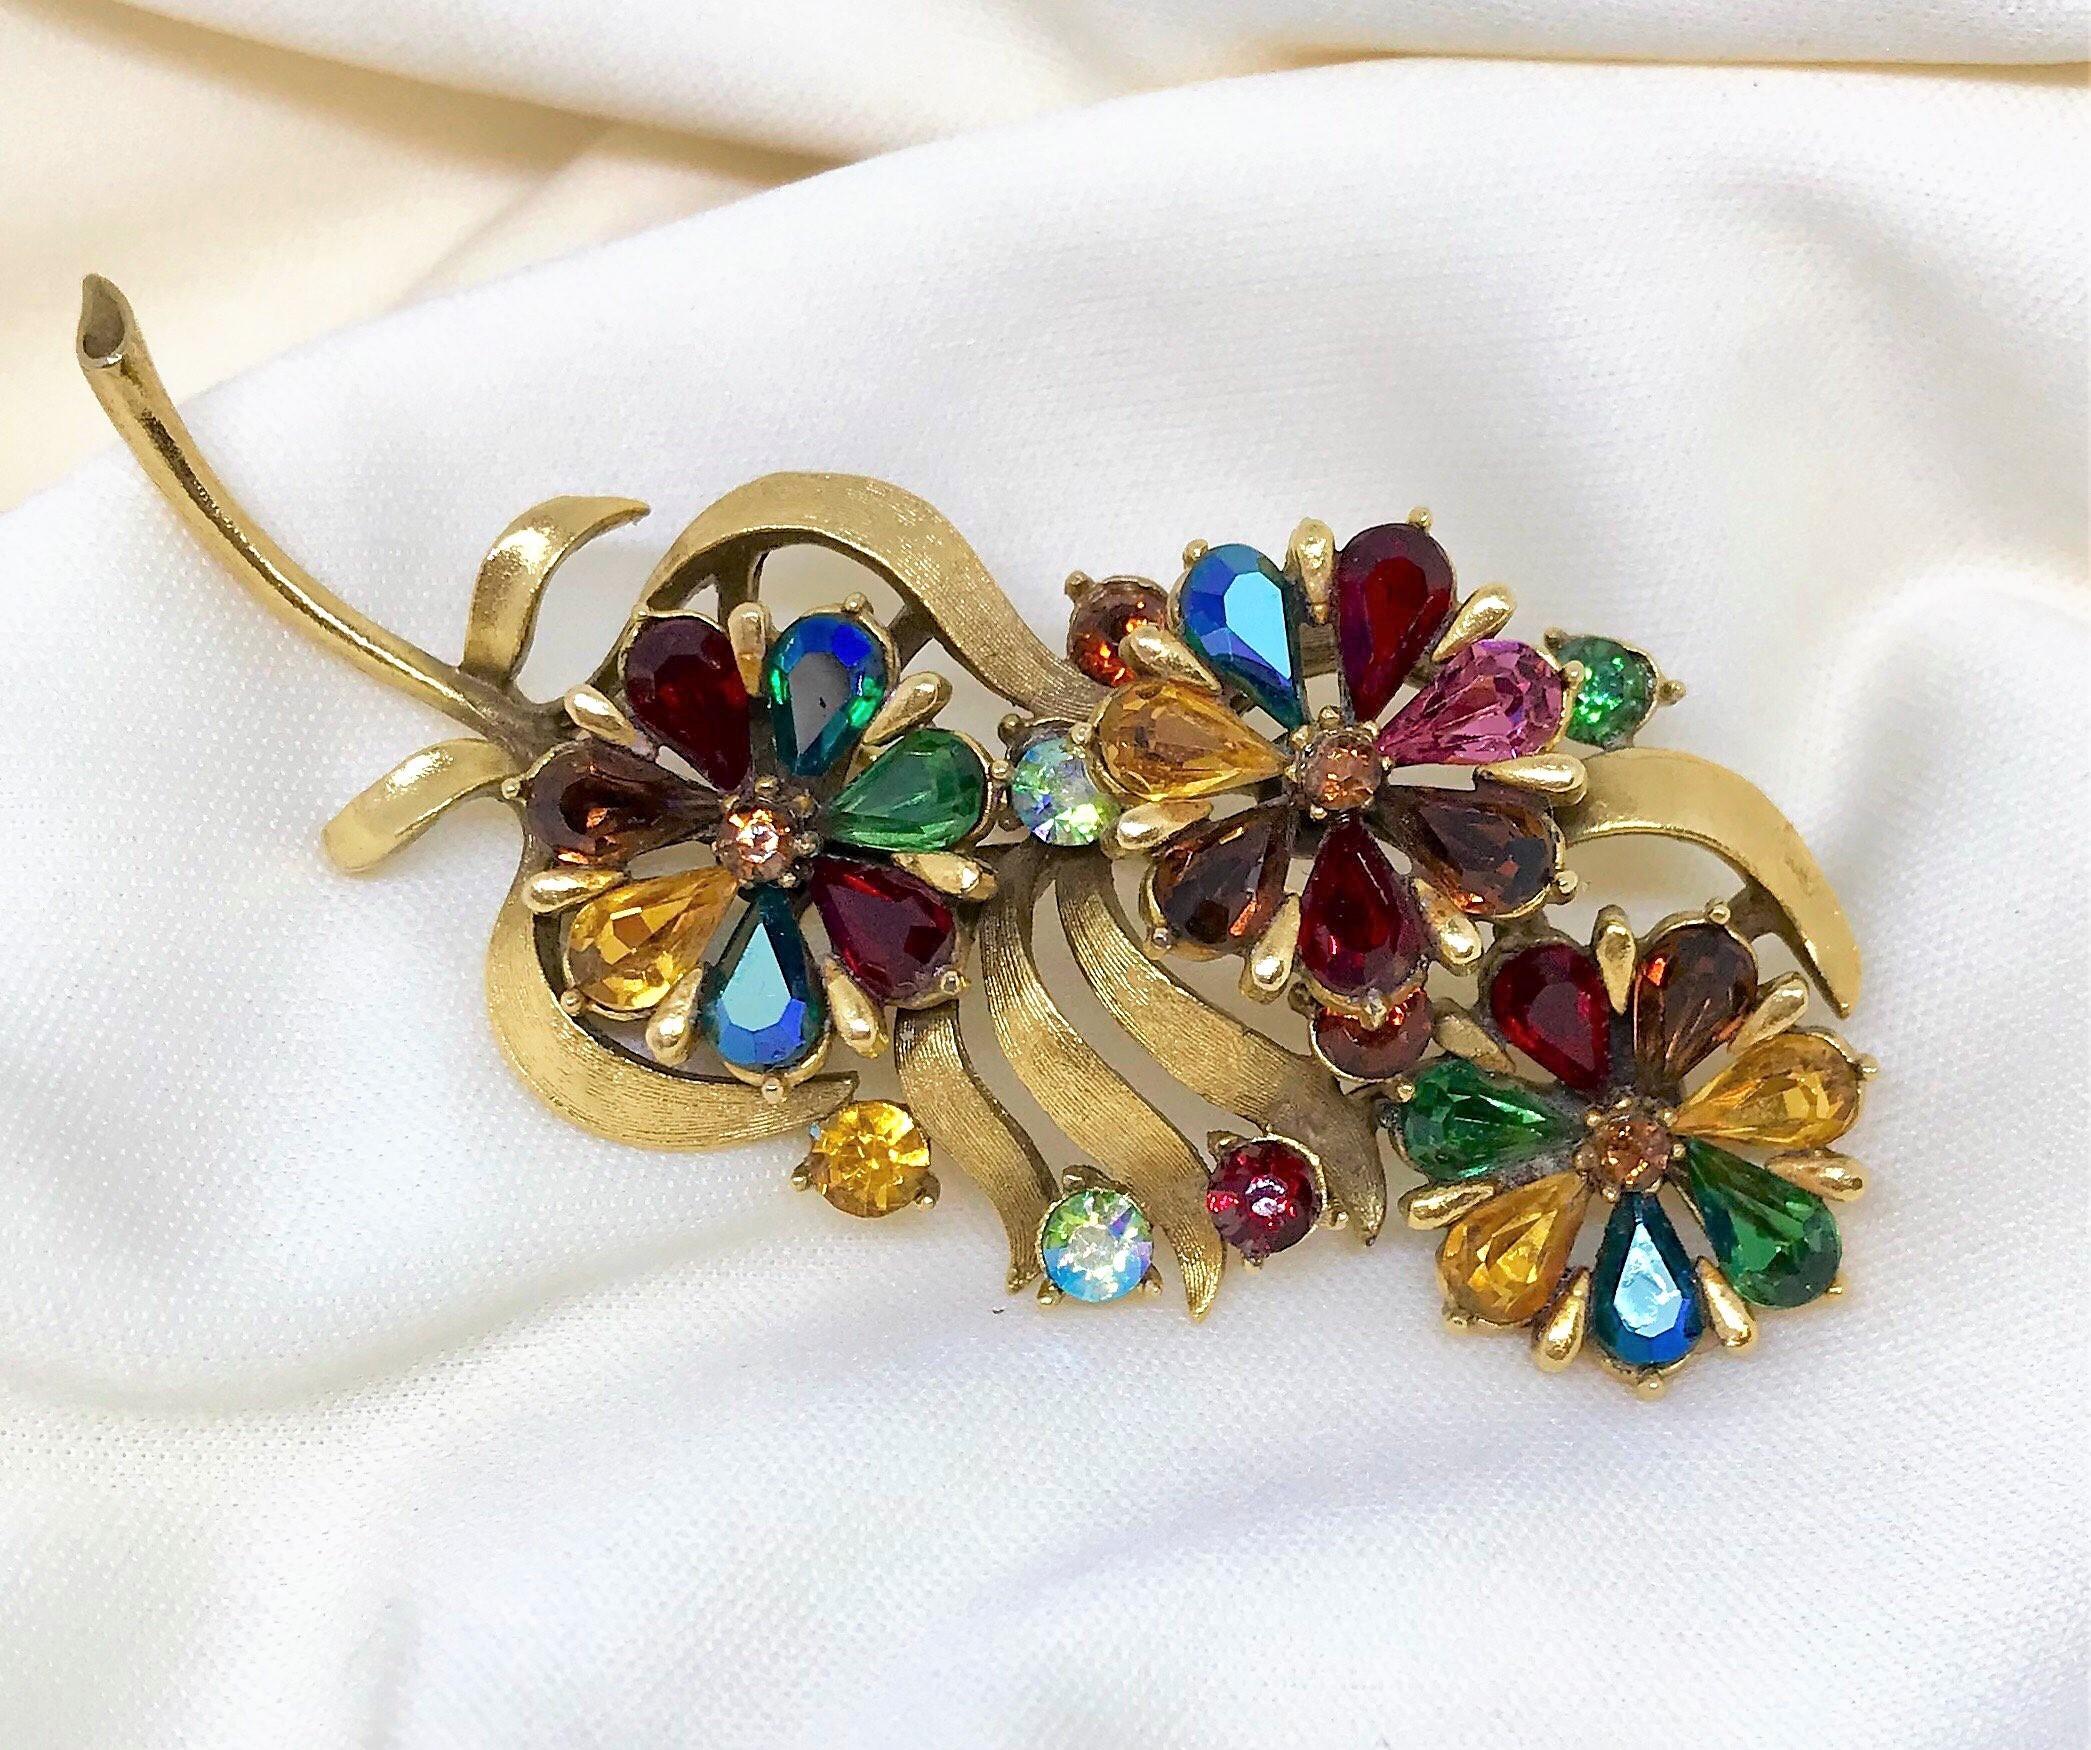 Circa 1960s Coro Jewel-Tone Faceted Stone Brooch  In Good Condition For Sale In Long Beach, CA